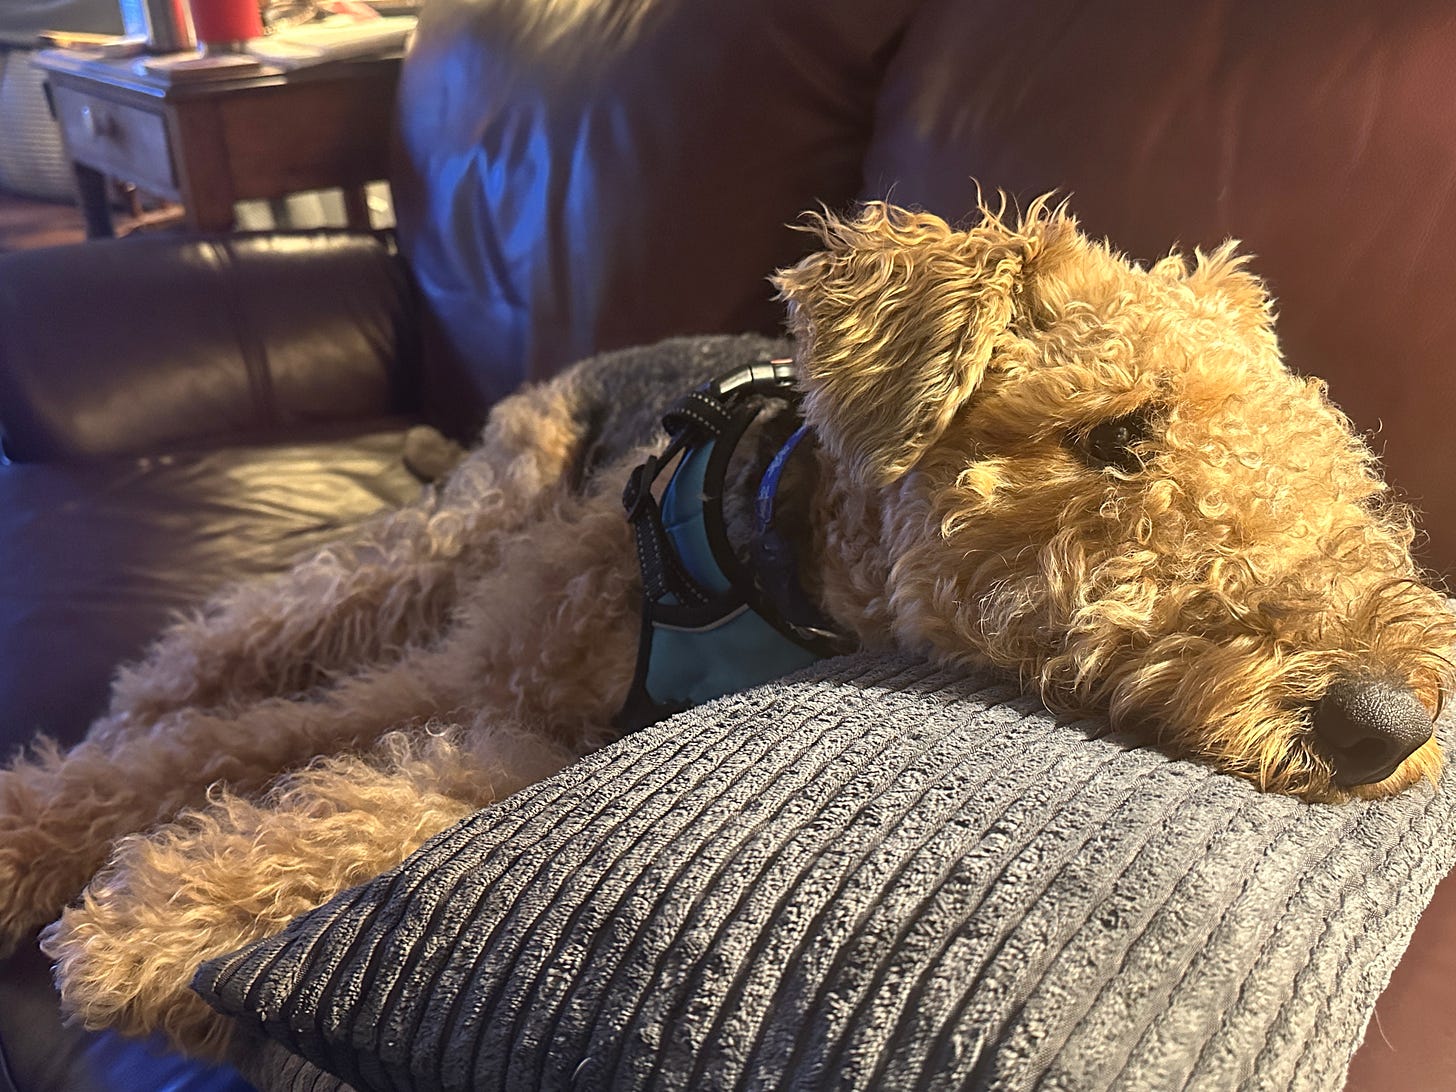 Airedale terrier stretched out on a couch